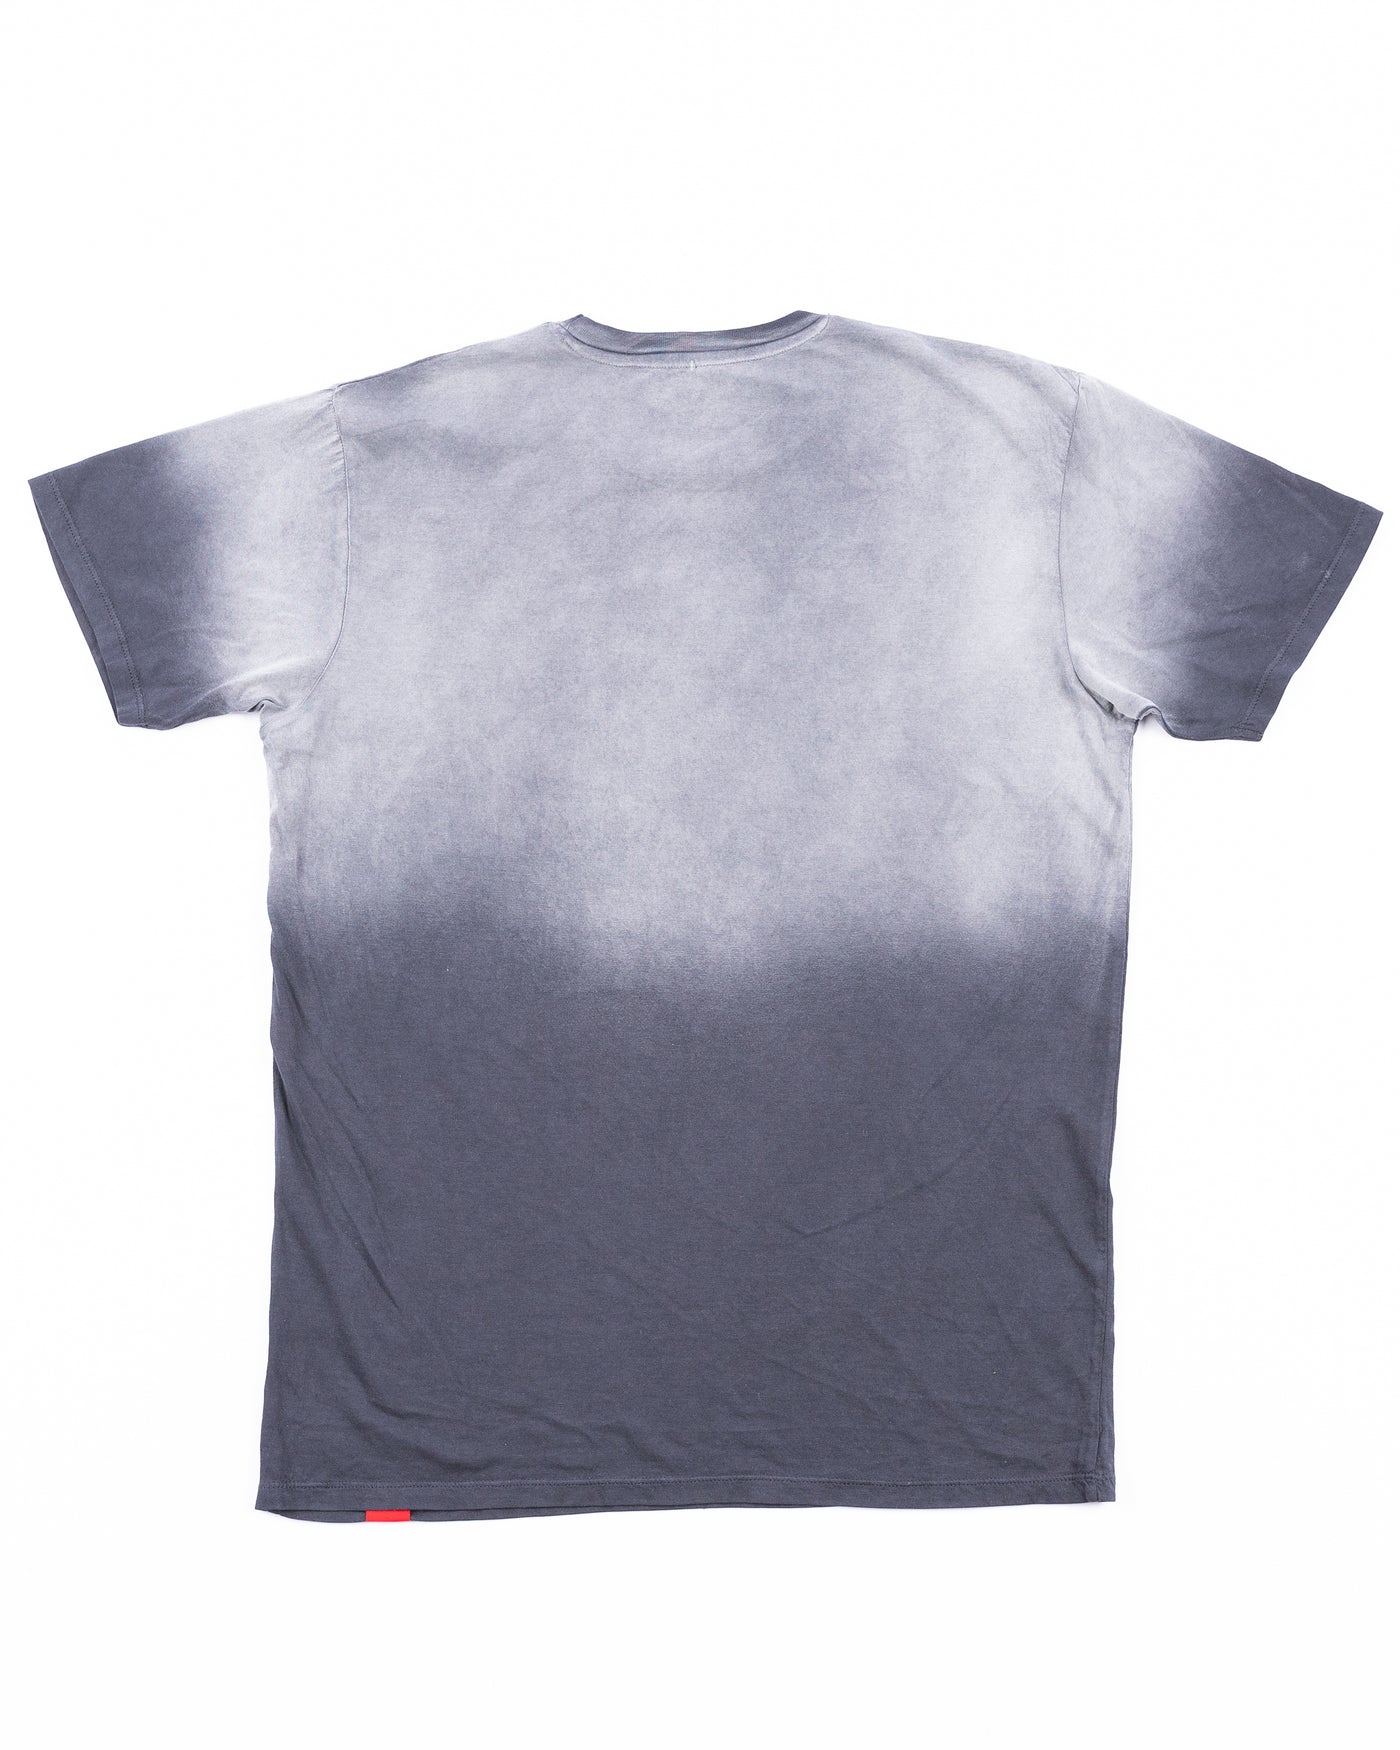 grey and white ombre Sportiqe short sleeve tee with Chicago Blackhawks wordmark and primary logo graphic across chest - back lay flat